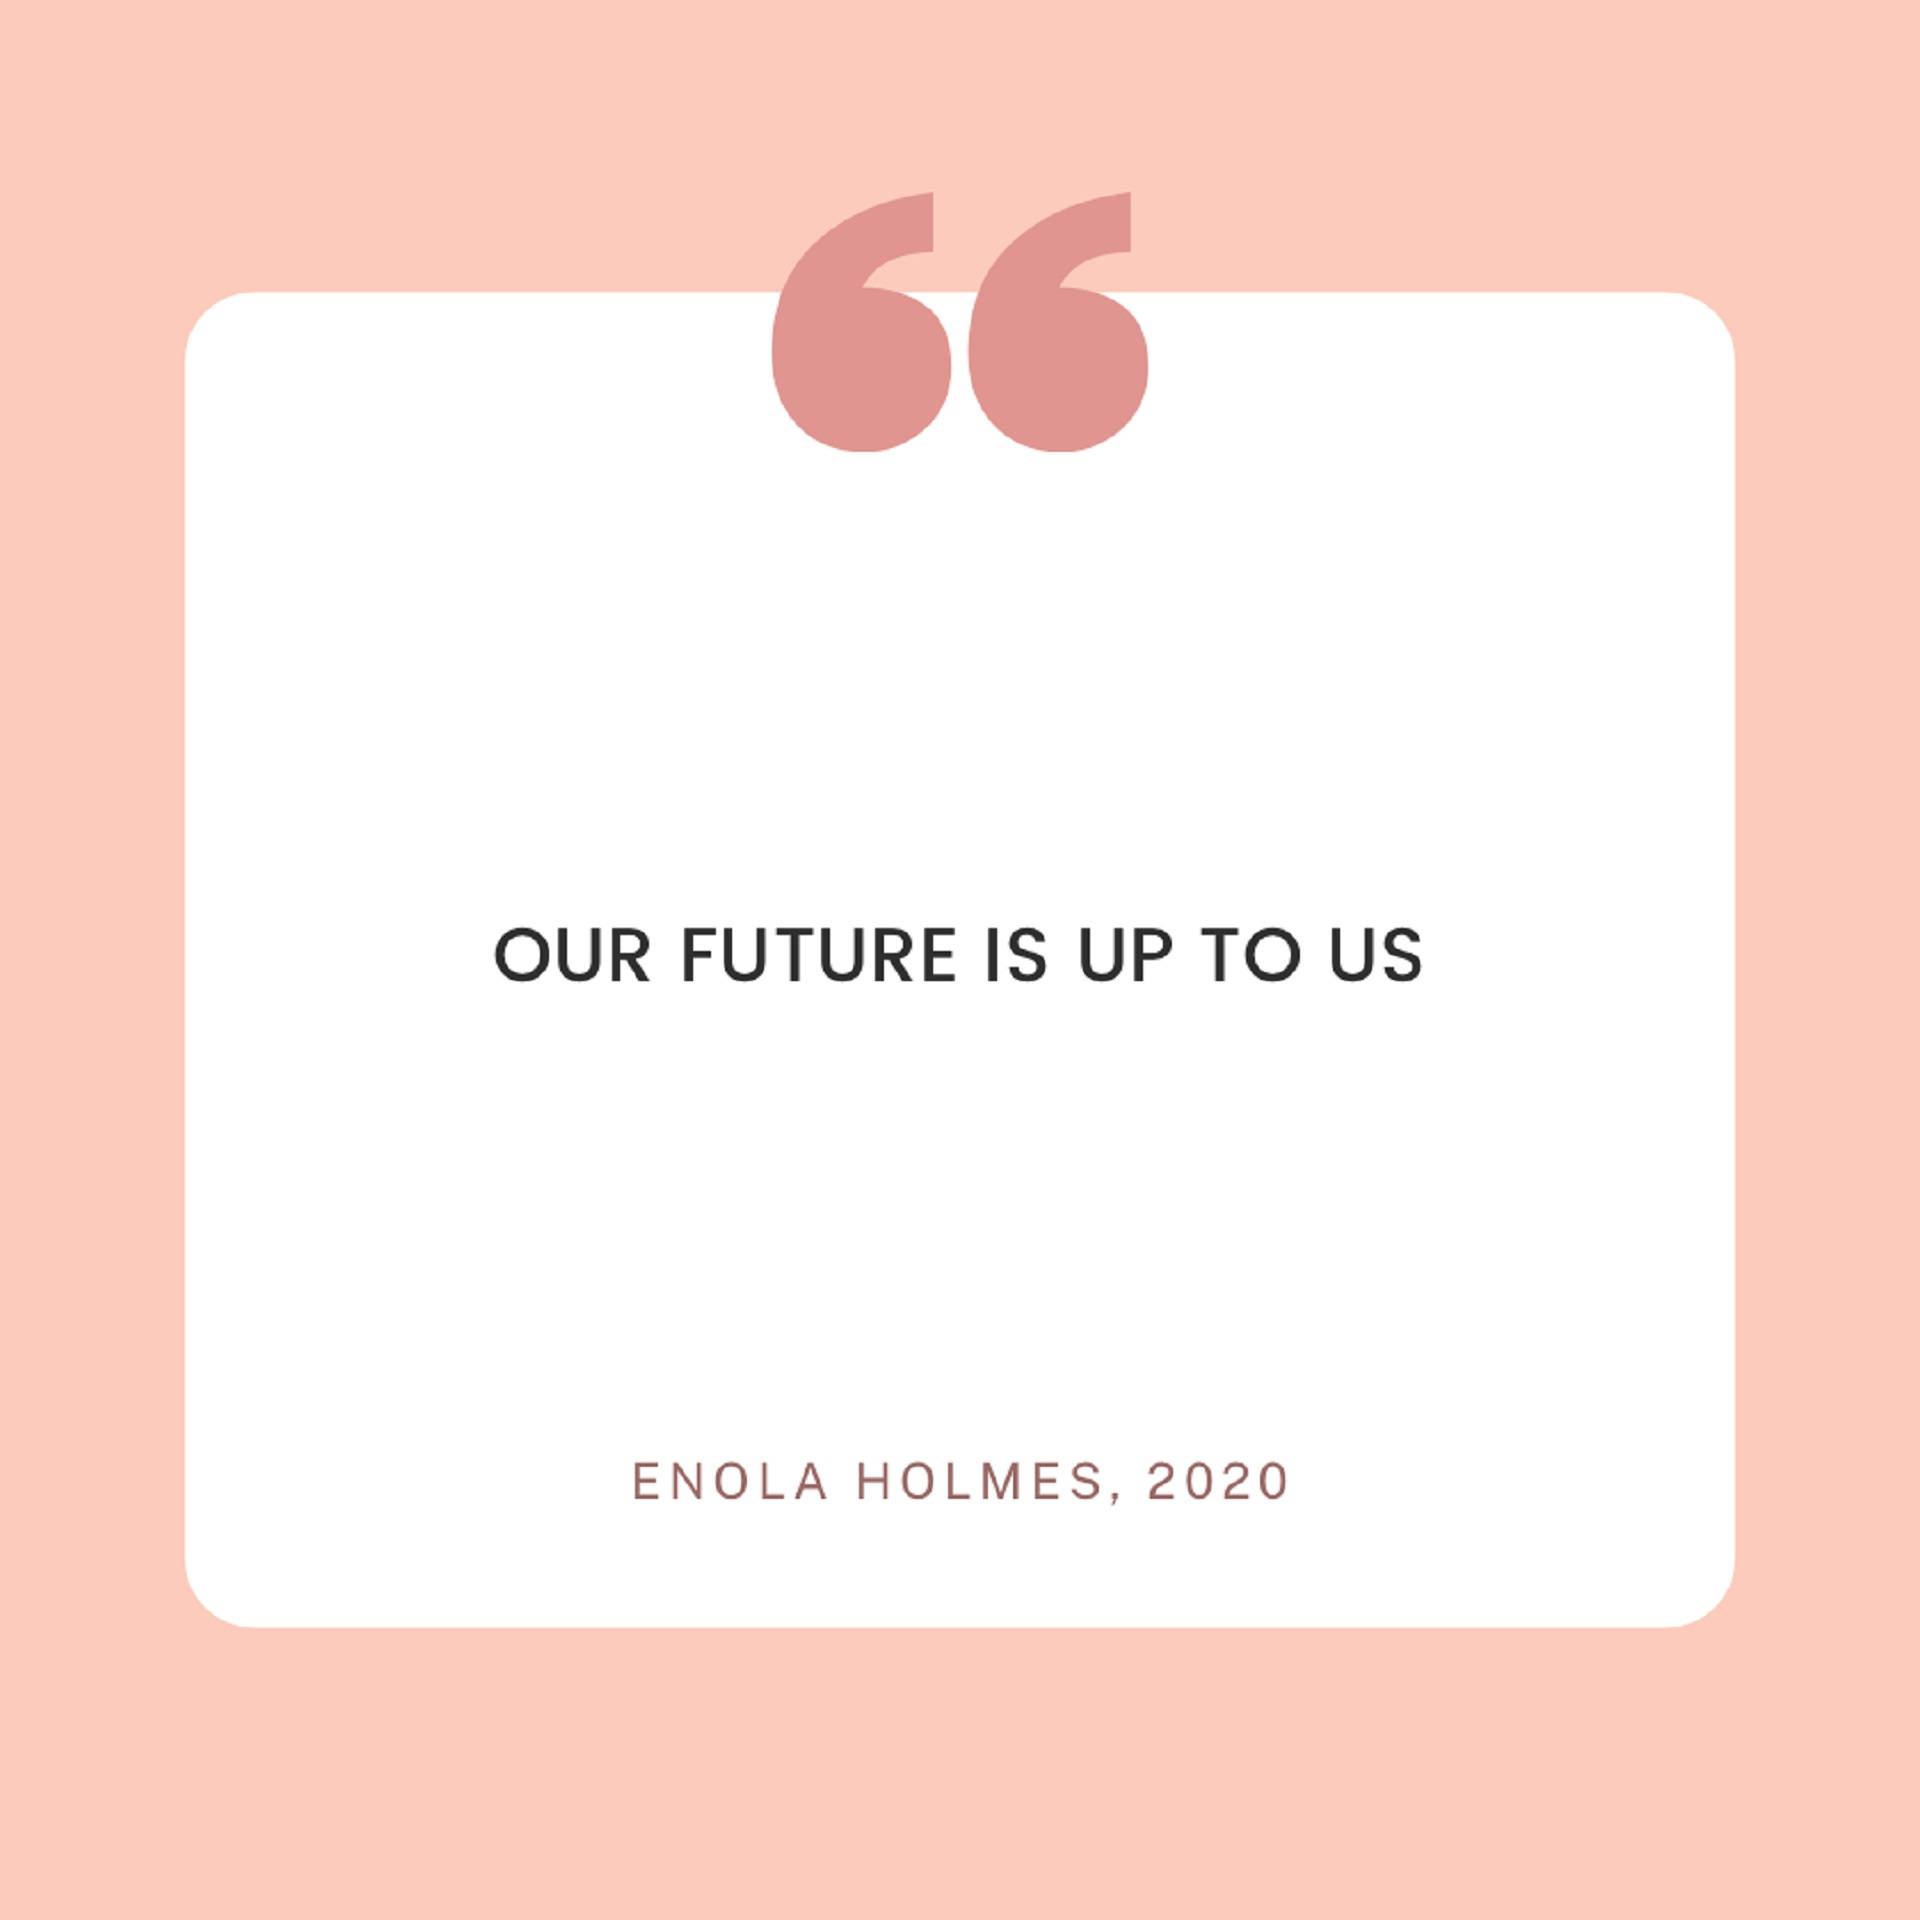 Enola Holmes Future Quote Aesthetic Background